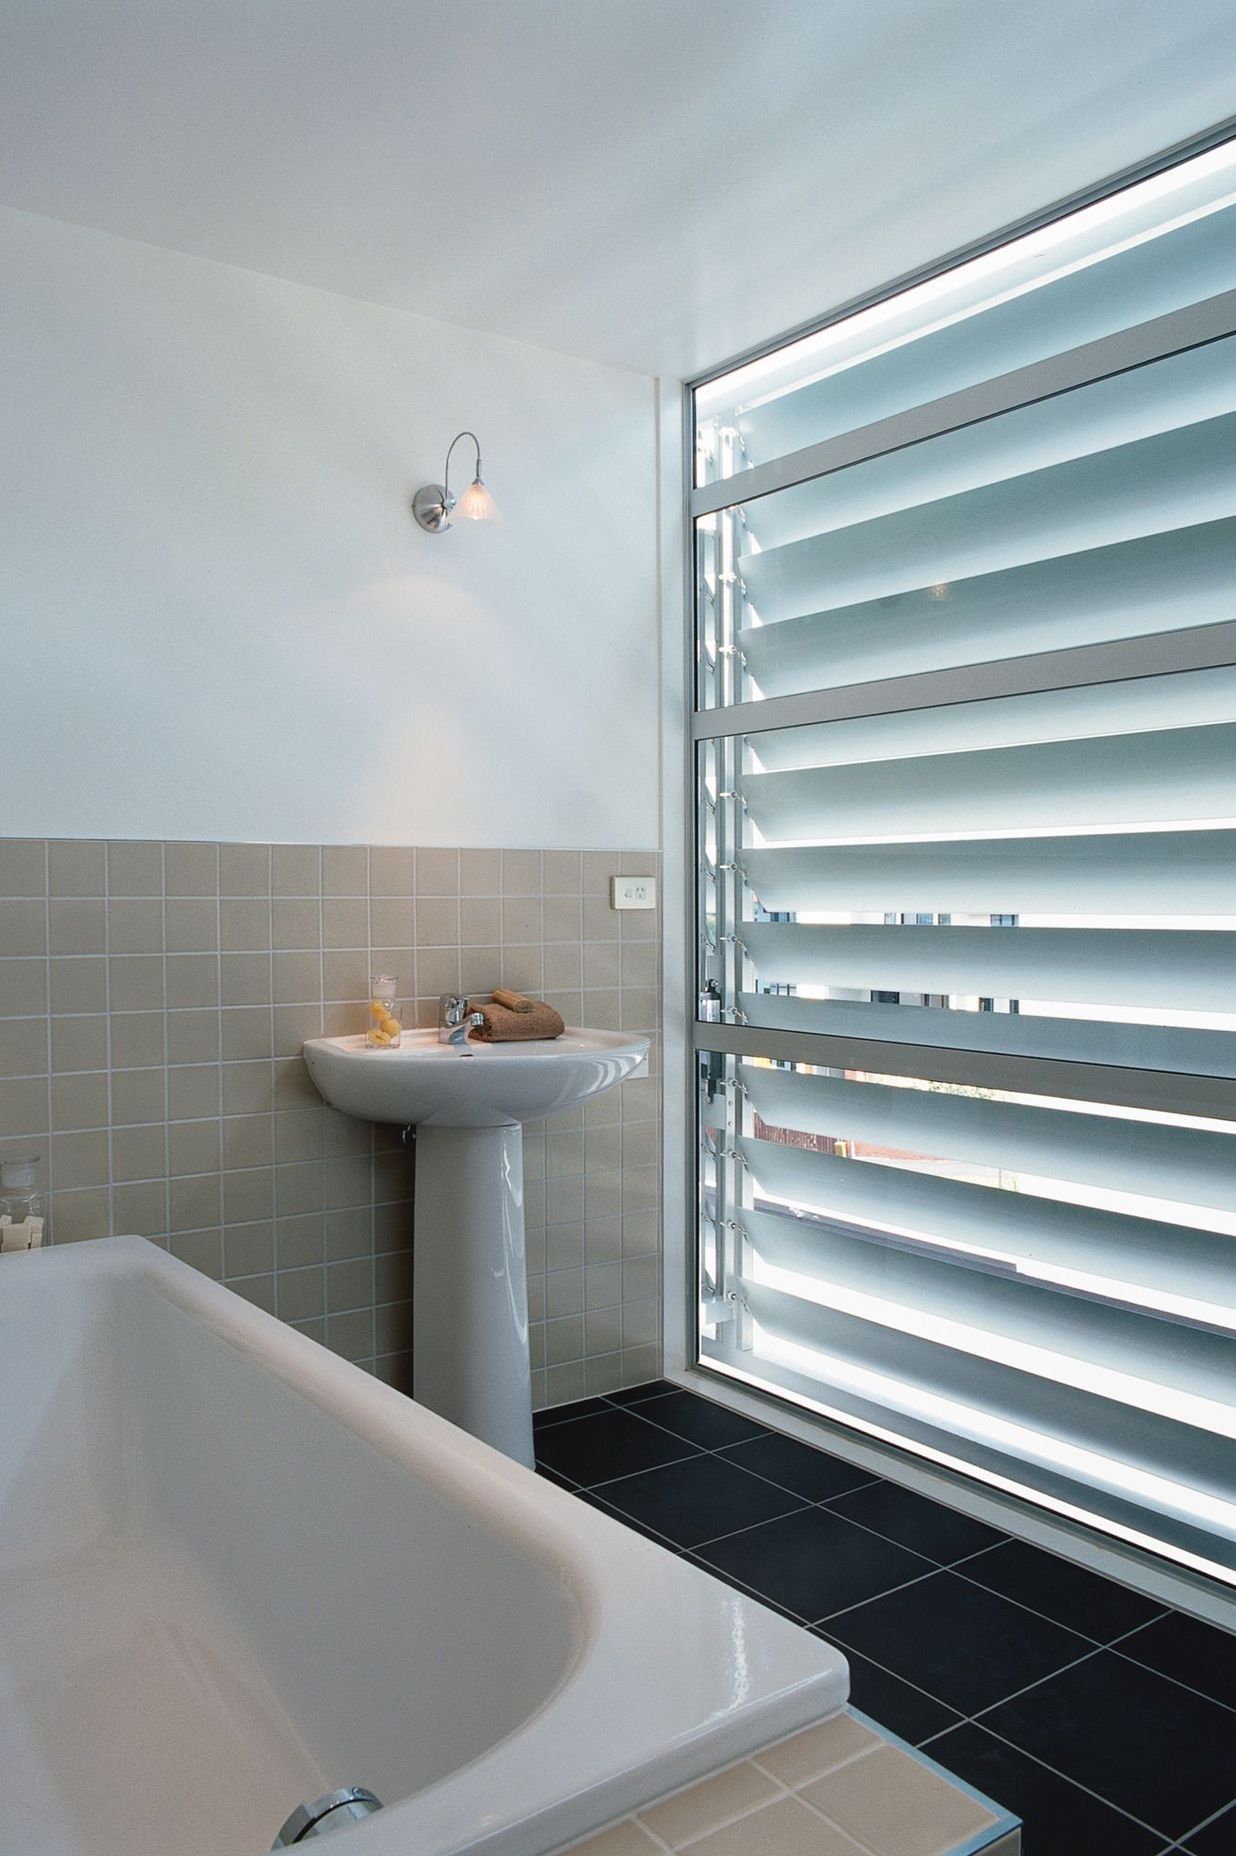 The third floor full bathroom is screened from the streetscape elevation by an adjustable Louvre Tec screen